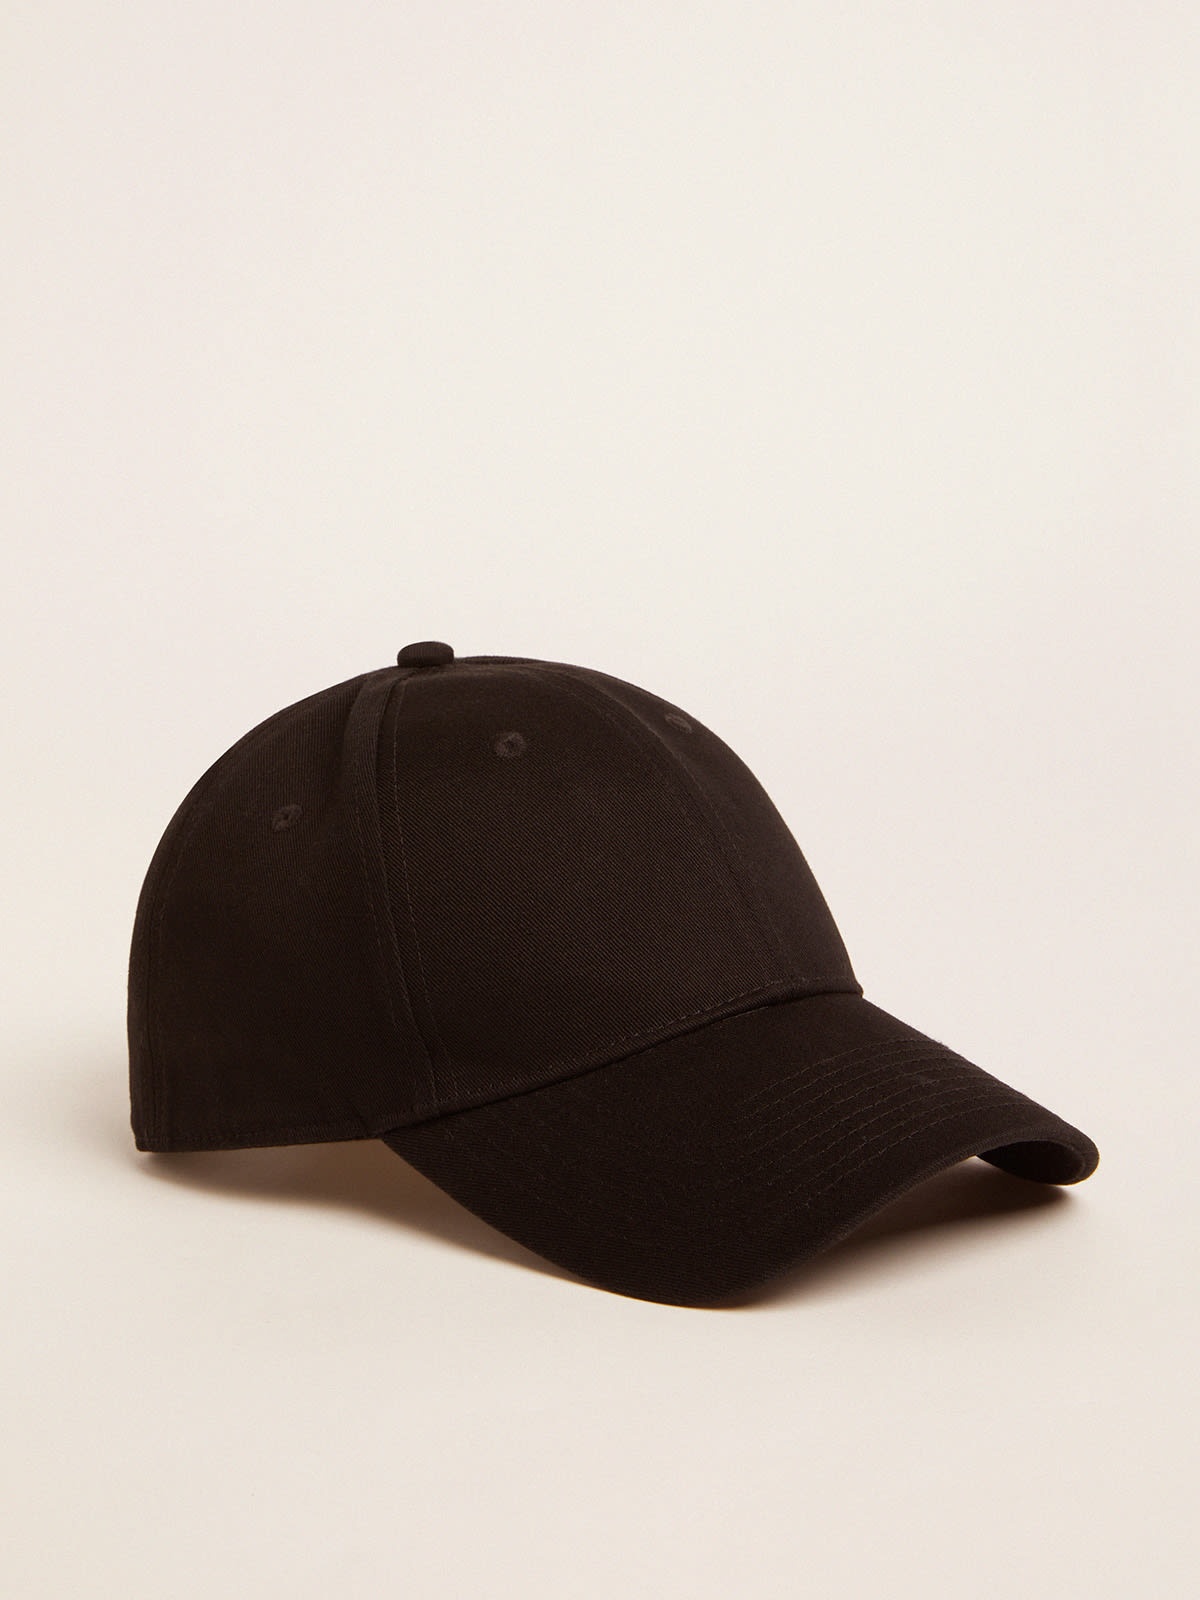 Black baseball cap with logo on the side - 2